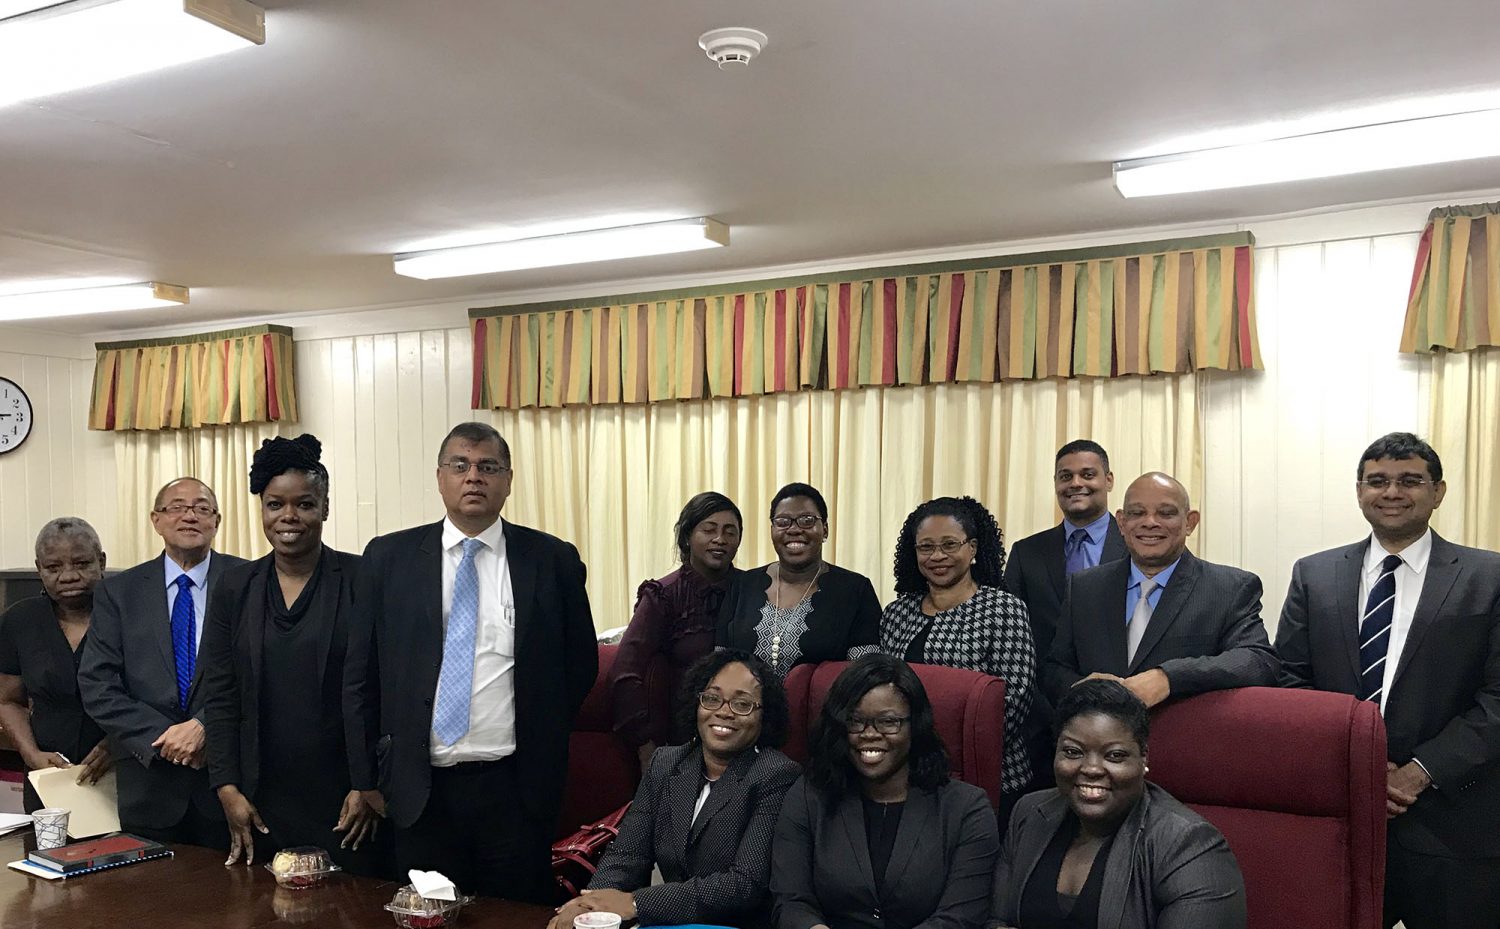 From left to right (standing) are Emily Dodson, Robin Stoby, Dionne Mc Cammon,  Narendra Singh,  Kim Kyte-Thomas, Ayana Mc Calman (representative of the Attorney General), Justice Yonette Cummings-Edwards, Kamal Ramkarran, Andrew Pollard and Devindra Kissoon. From left to right (sitting) are  Tracy Gibson,  Faye Barker-Meredith and Mandisa Breedy. 